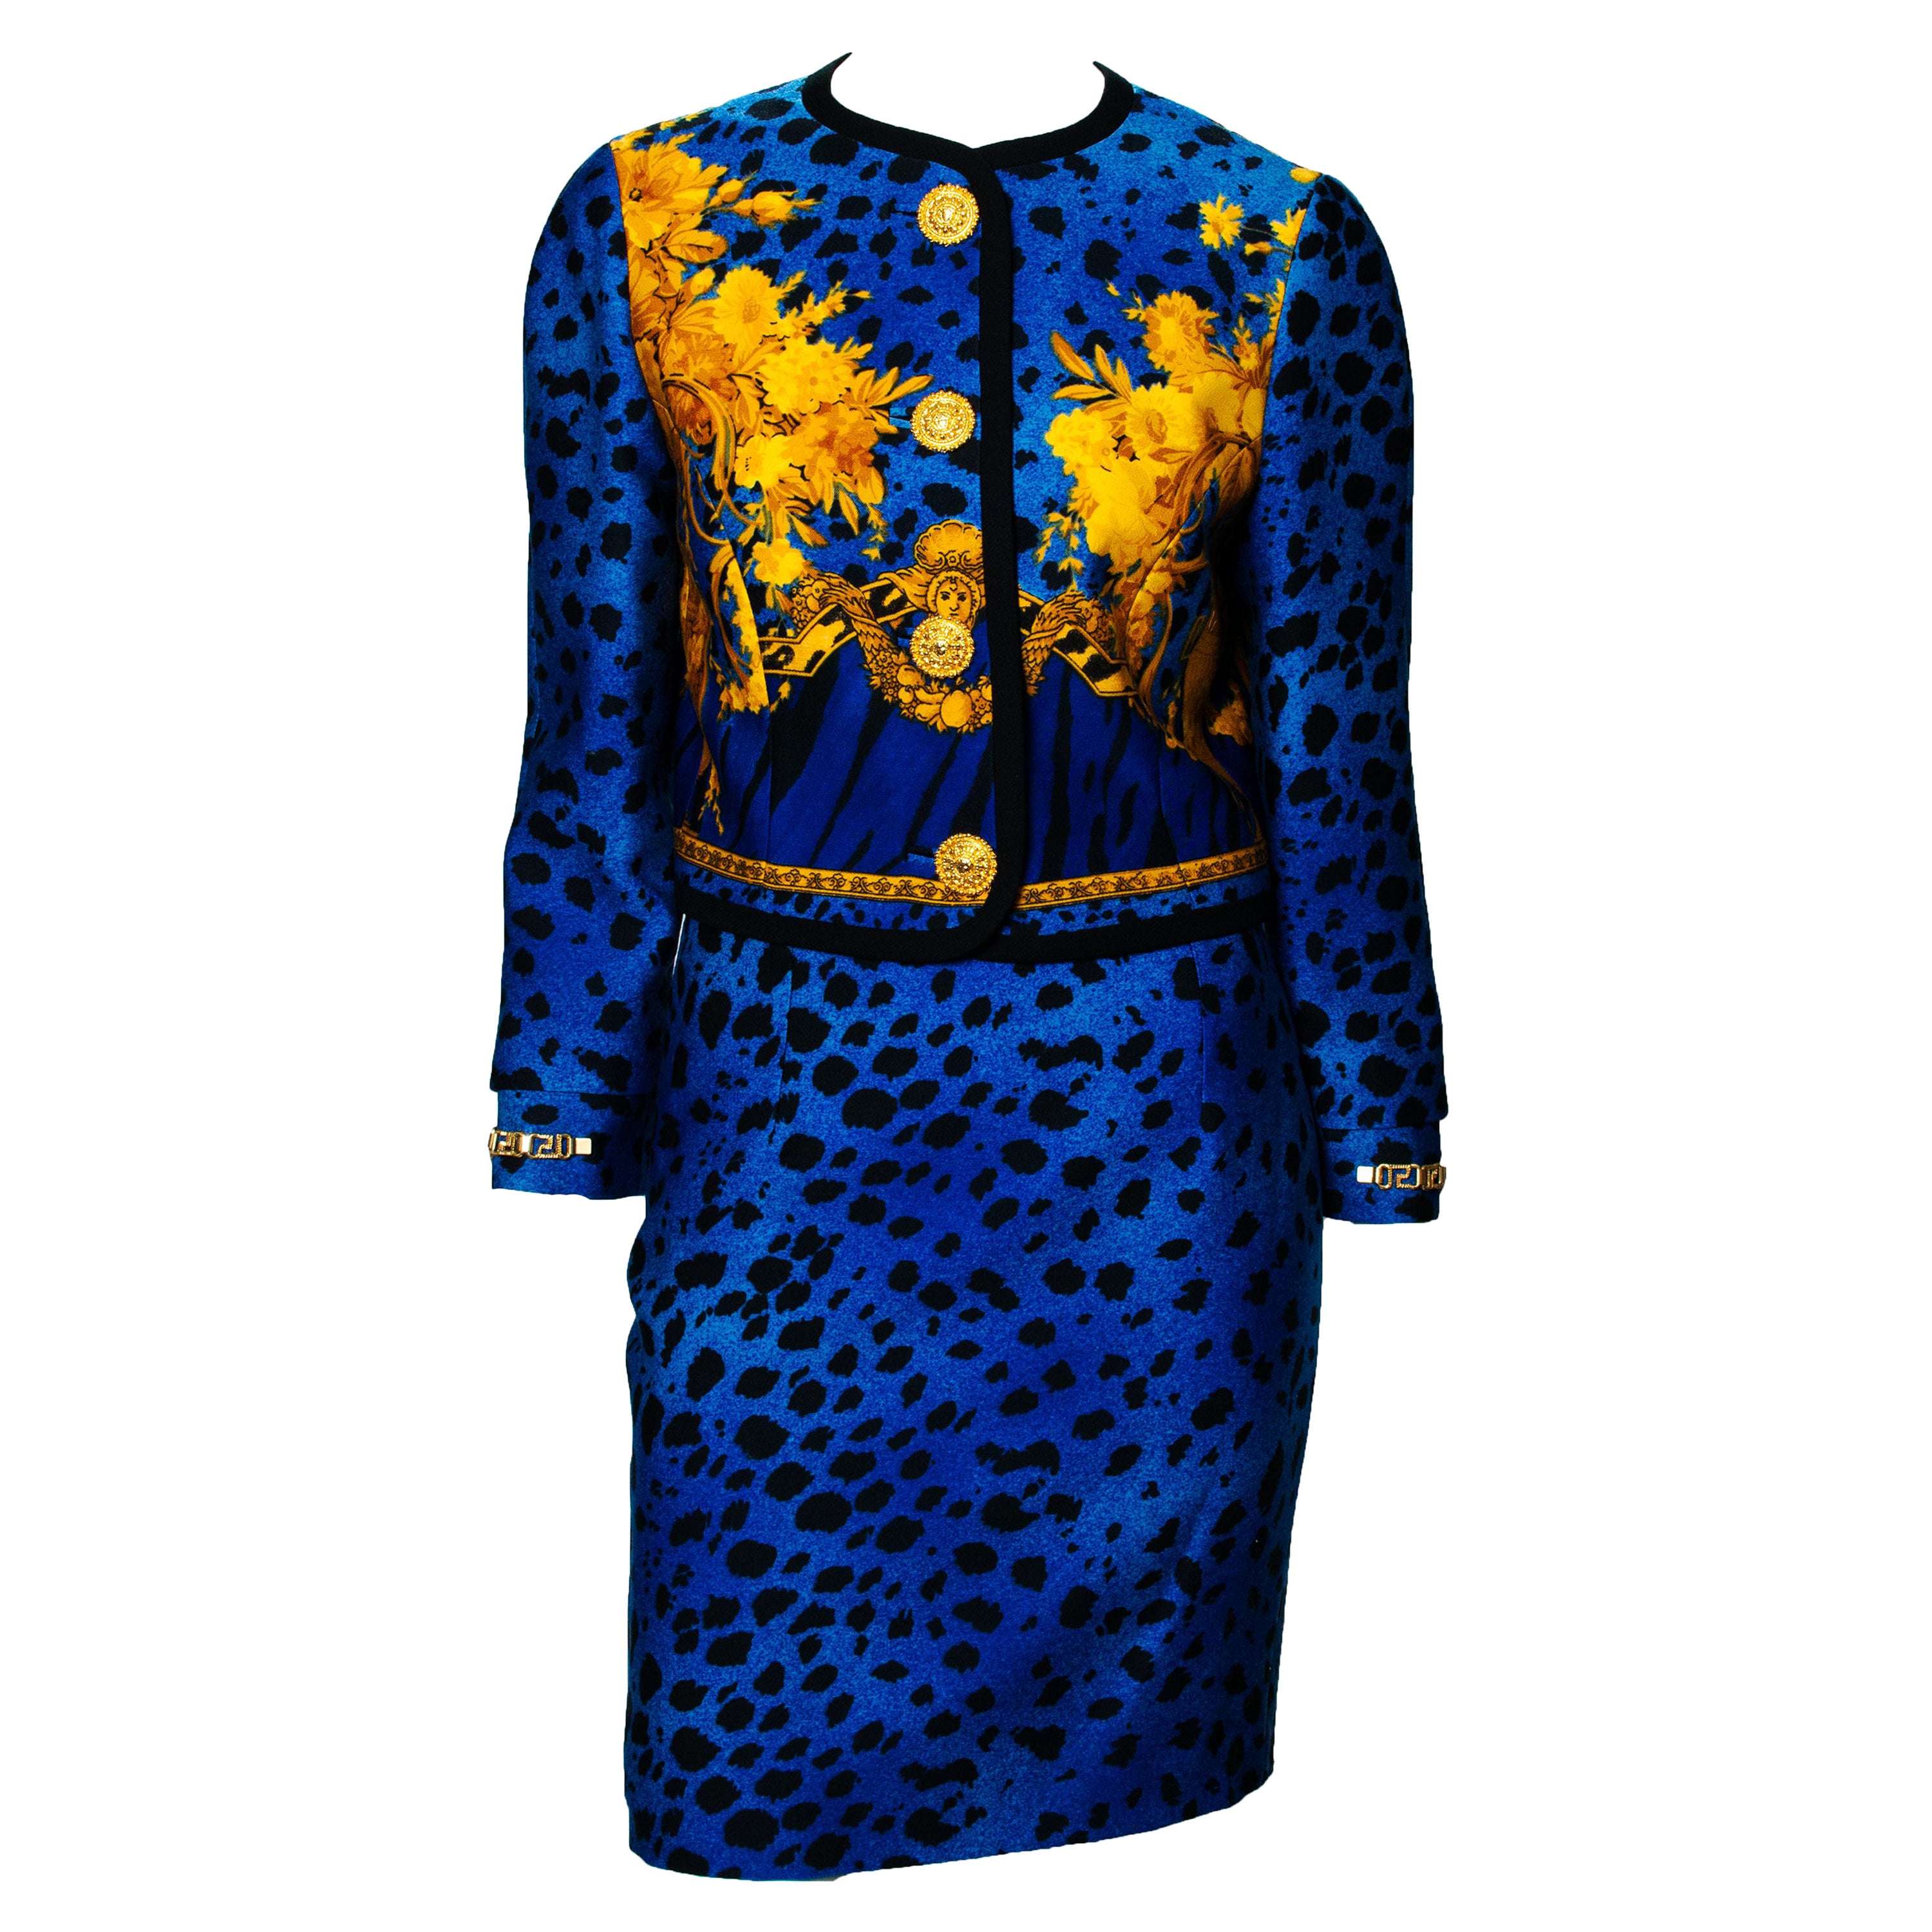 1992 Gianni Versace Blue Baroque Leopard Print Skirt Suit with Gold Chain Cuffs